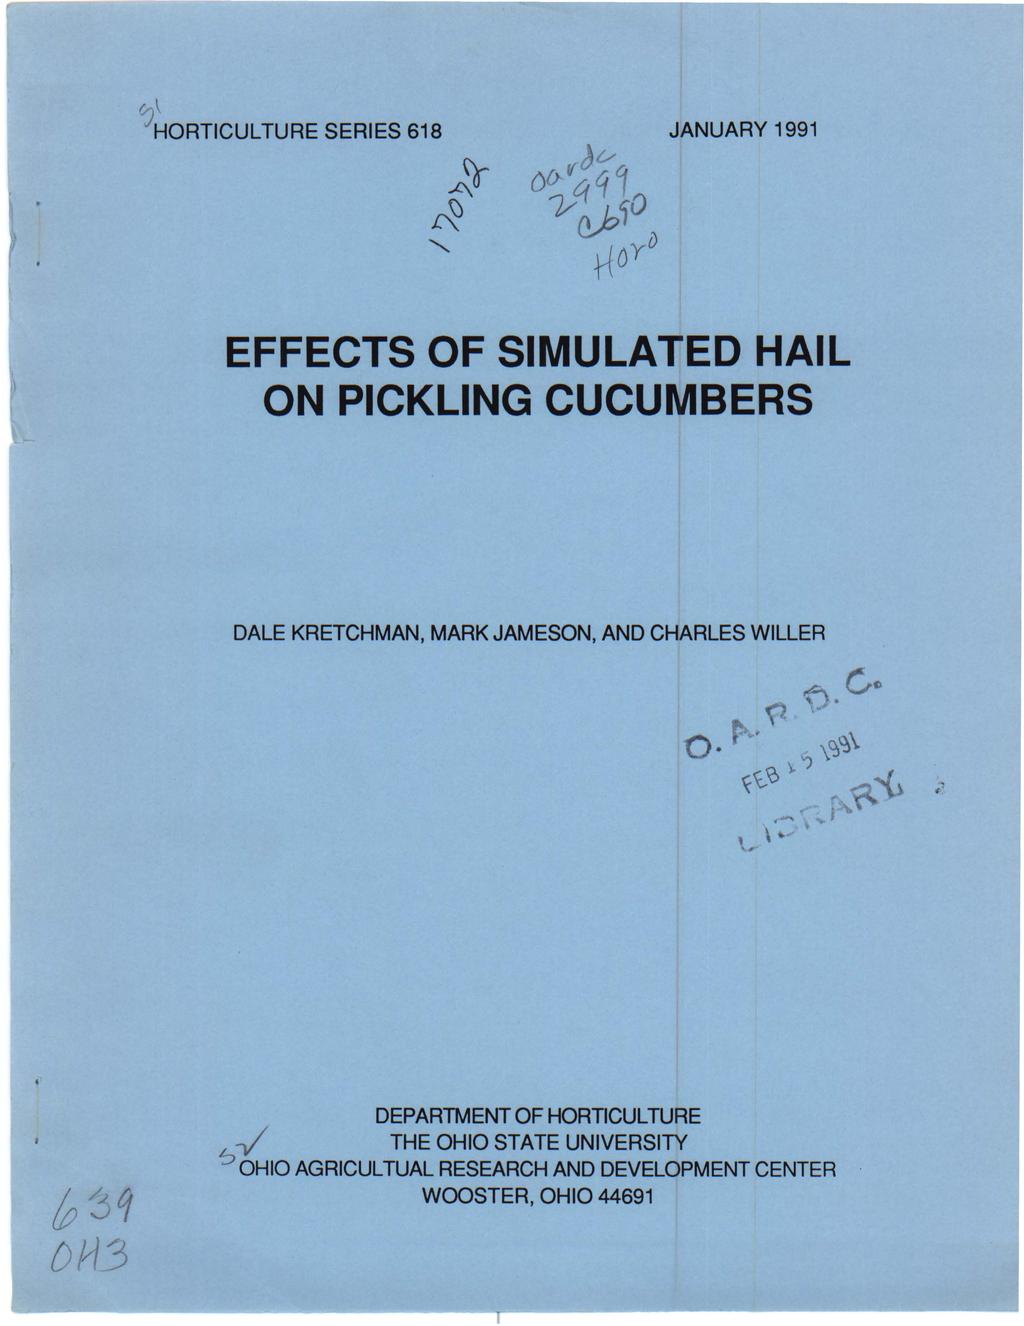 C;/~ORTICULTURE SERIES 618 JANUARY 1991 EFFECTS OF SIMULATED HAIL ON PICKLING CUCUMBERS DALE KRETCHMAN, MARK JAMESON, AND CHARLES